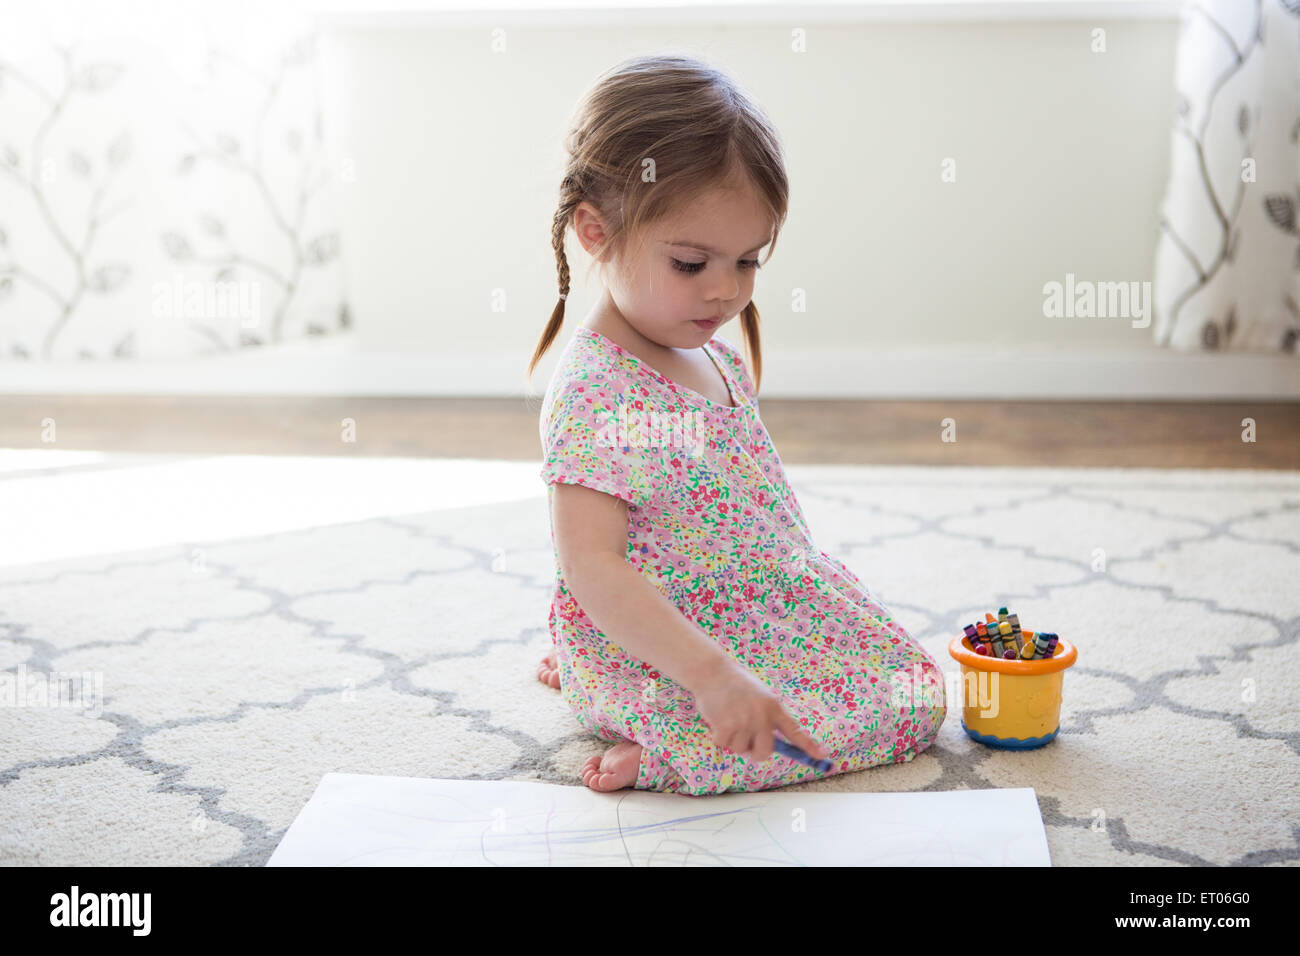 Girl in dress drawing with crayons Stock Photo